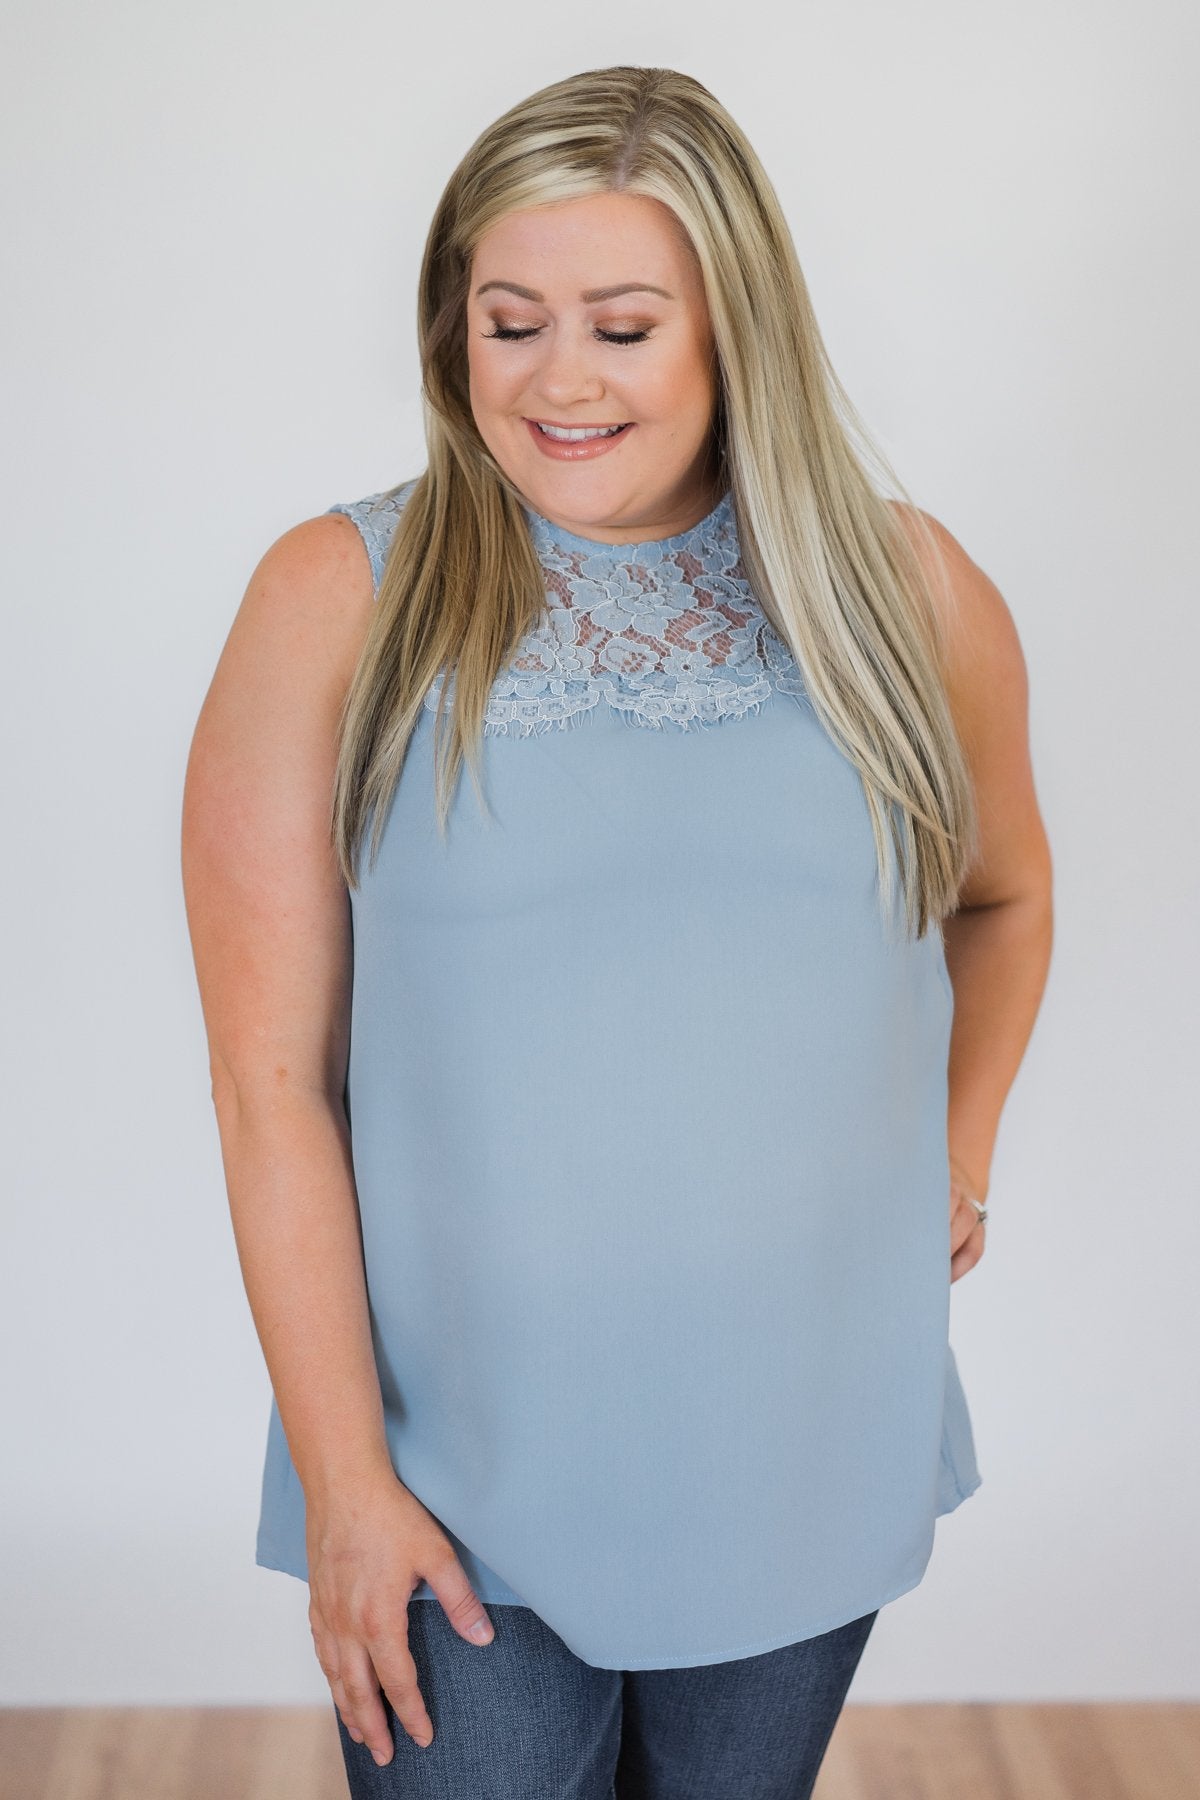 Breathtaking in Lace Tank Top- Baby Blue – The Pulse Boutique